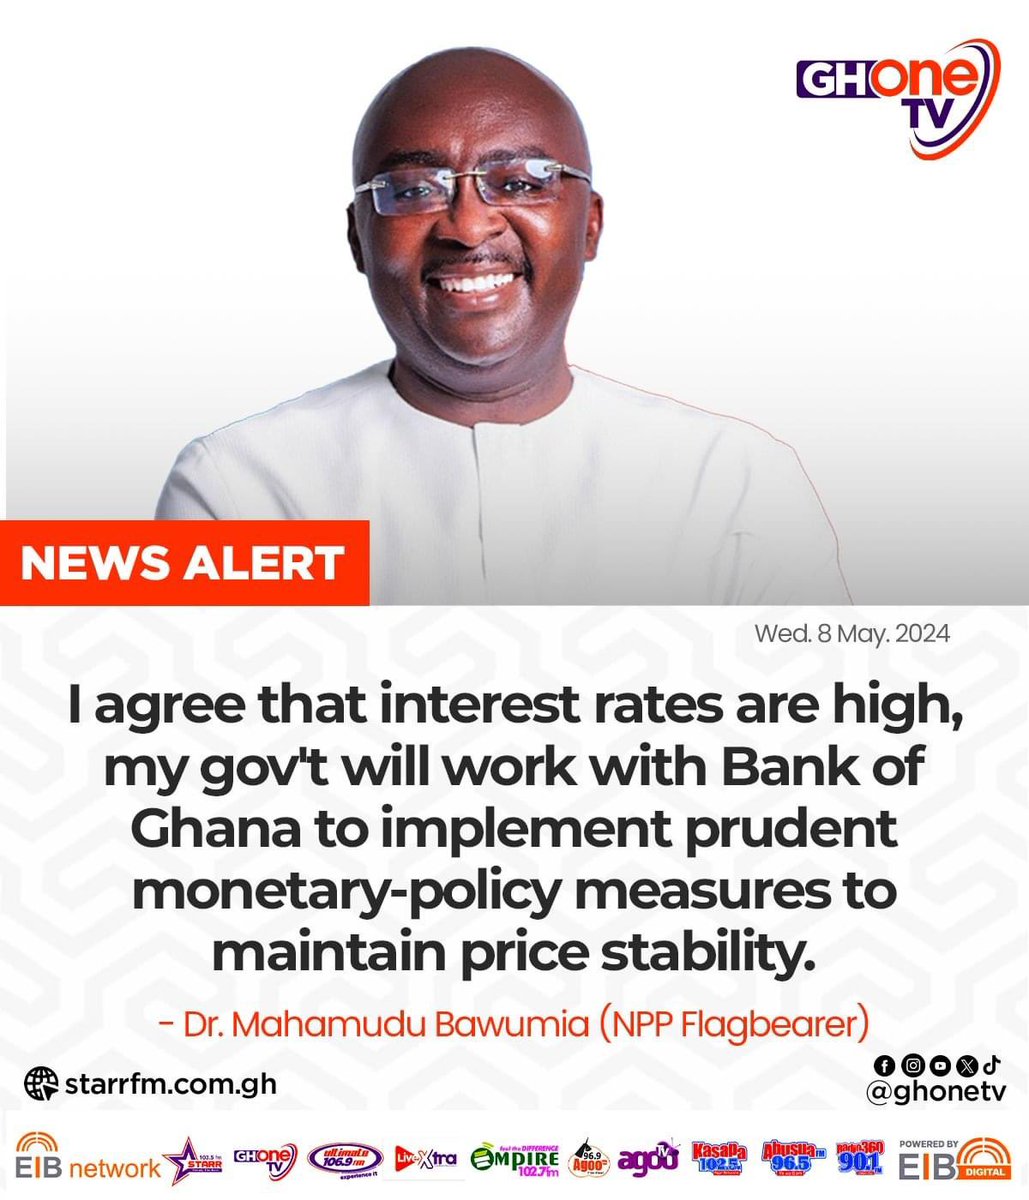 In 2017, Bawumia said, 'The GhanaCard and digital address will reduce interest rates.'

Fast forward to 2024, here is Bawumia telling us that interest rates are high and that his government will reduce them if he becomes President.

Why can't he do it now??? #Bawuliar nie